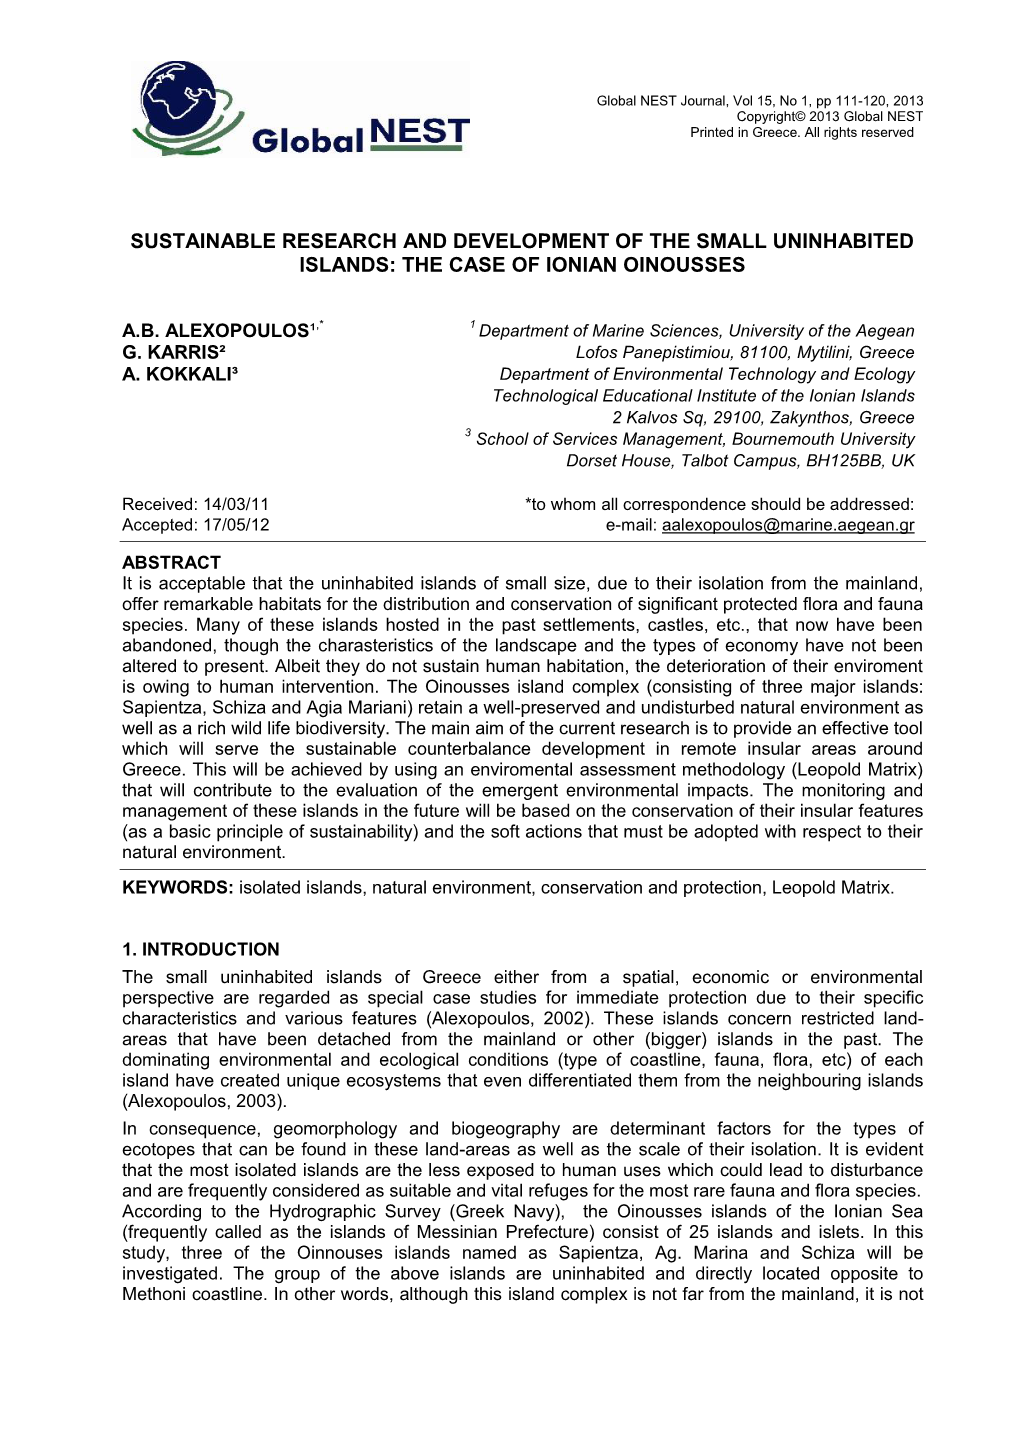 Sustainable Research and Development of the Small Uninhabited Islands: the Case of Ionian Oinousses